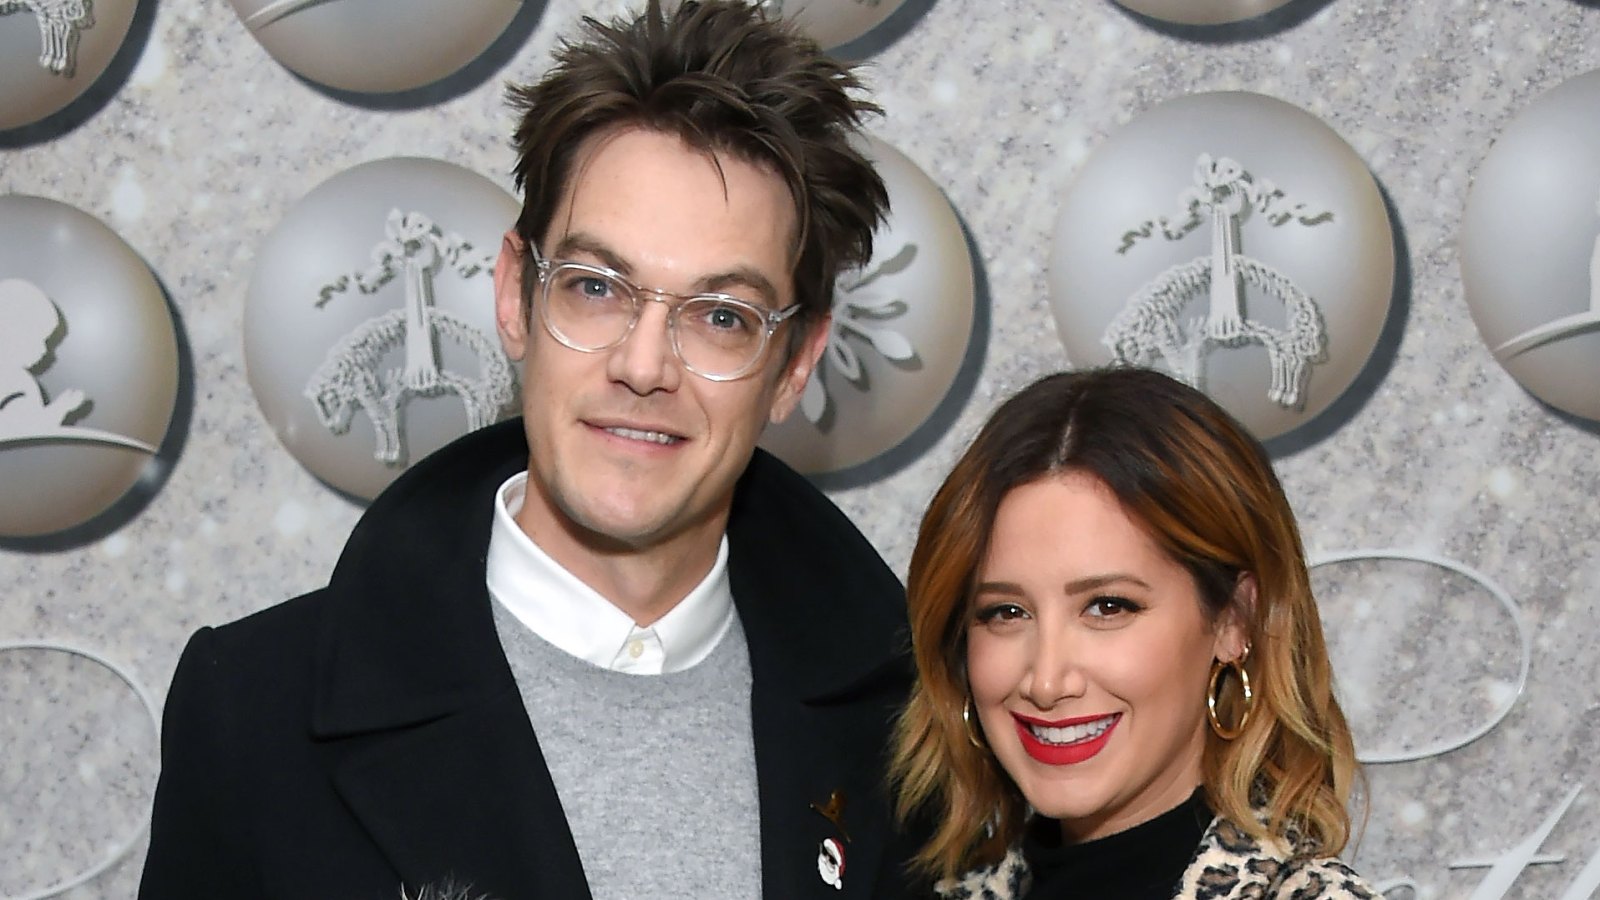 Ashley Tisdale Forces Husband Christopher French to Watch 'High School Musical' for the First Time